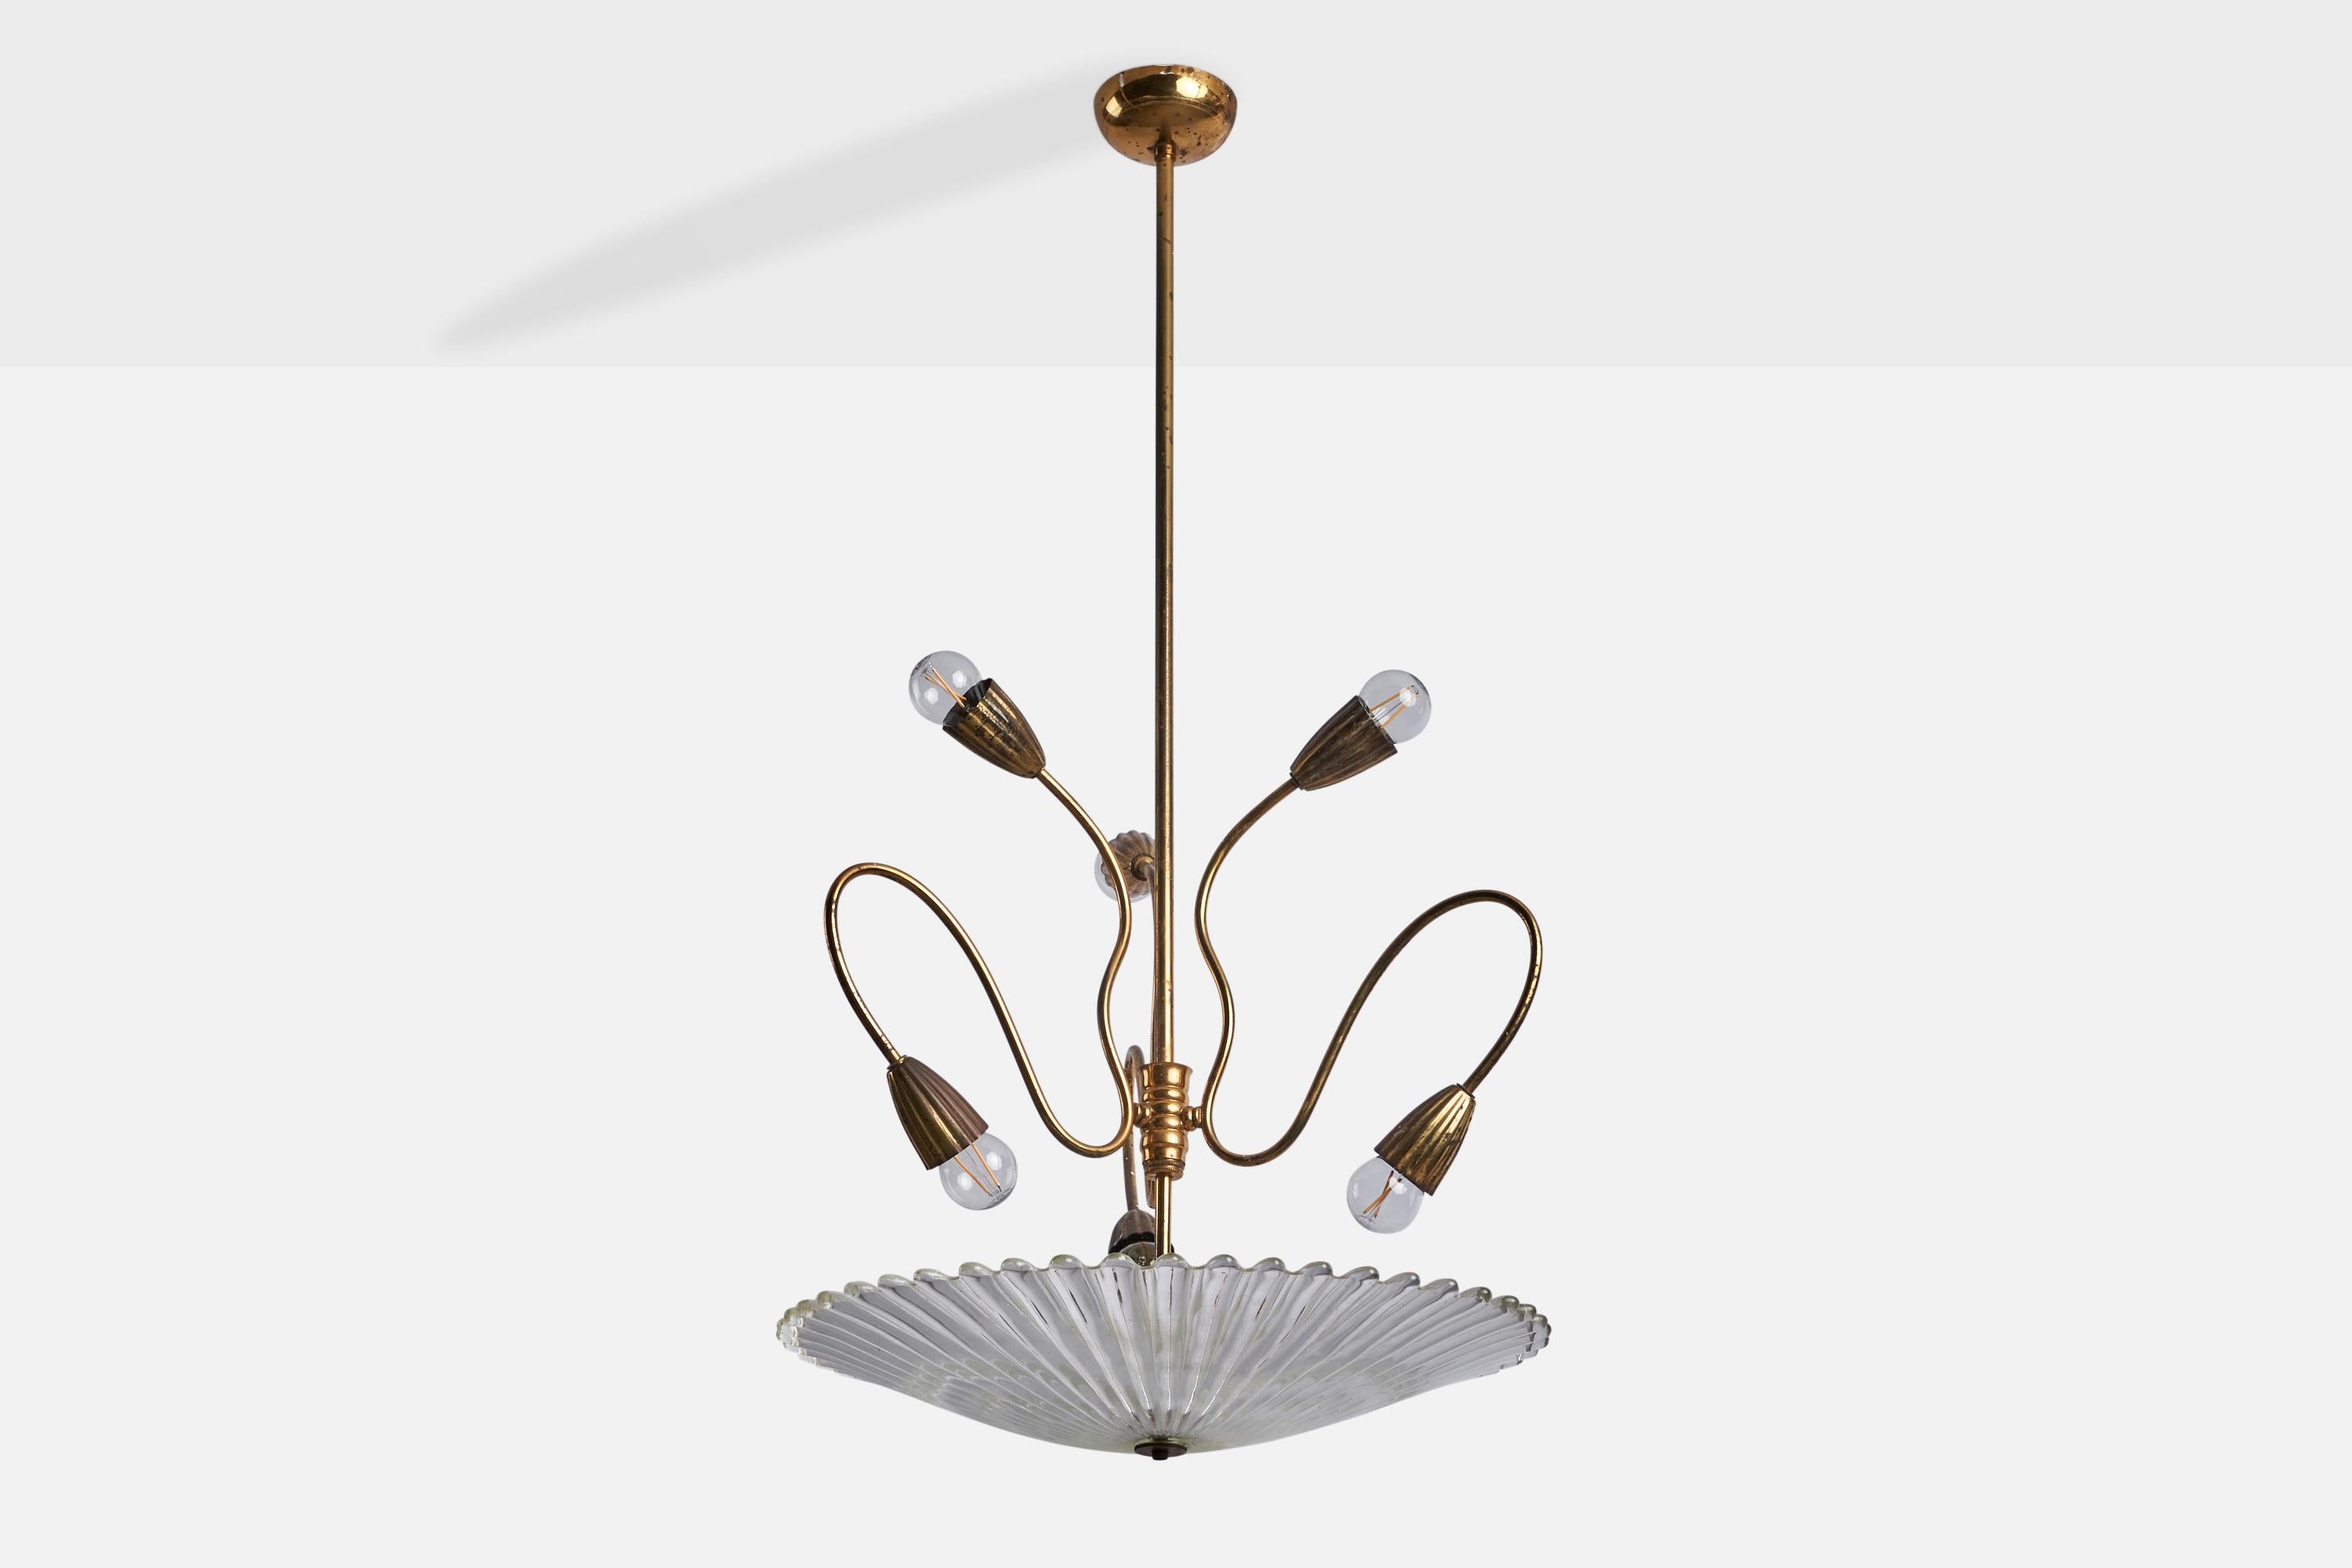 A brass and Murano glass chandelier, designed and produced in Italy, c. 1930s.

Overall Dimensions (inches): 22” H x 23” Diameter
Bulb Specifications: E-26 Bulb
Number of Sockets: 5